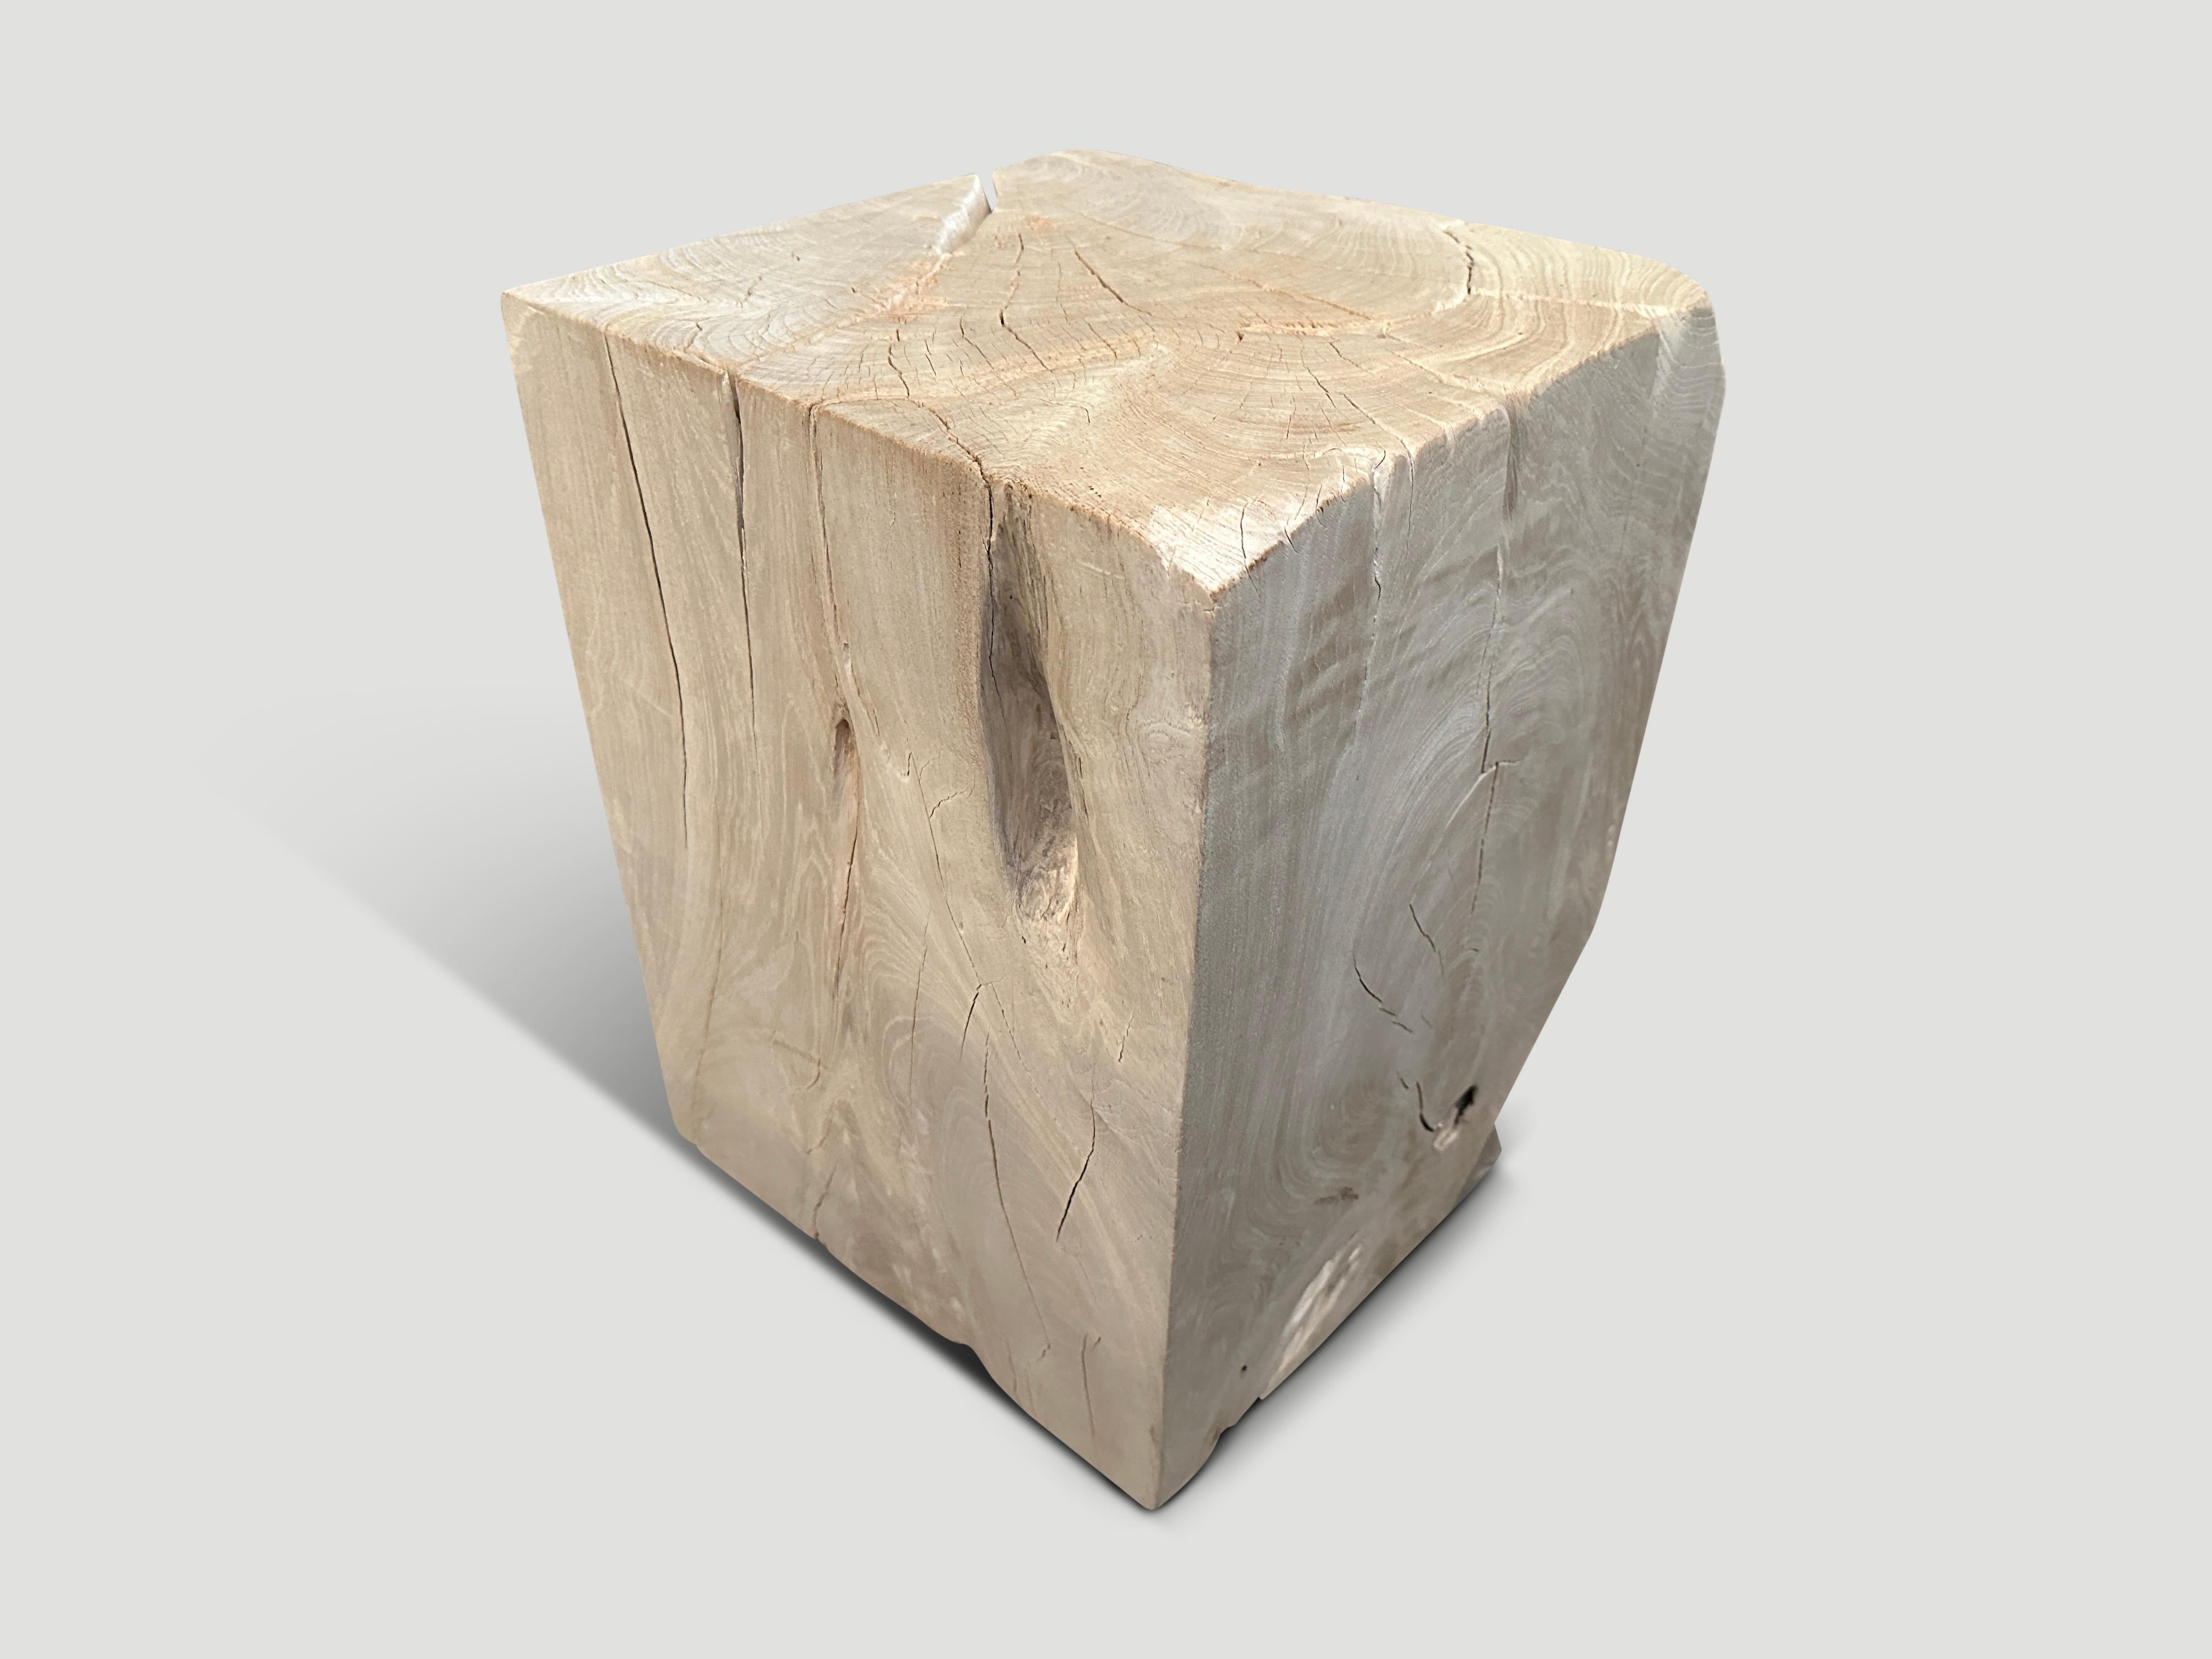 Reclaimed teak wood side table, hand carved whilst respecting the natural organic wood. Bleached to a bone finish. We have a collection. The images reflect the one shown. 

The St. Barts Collection features an exciting line of organic white wash,